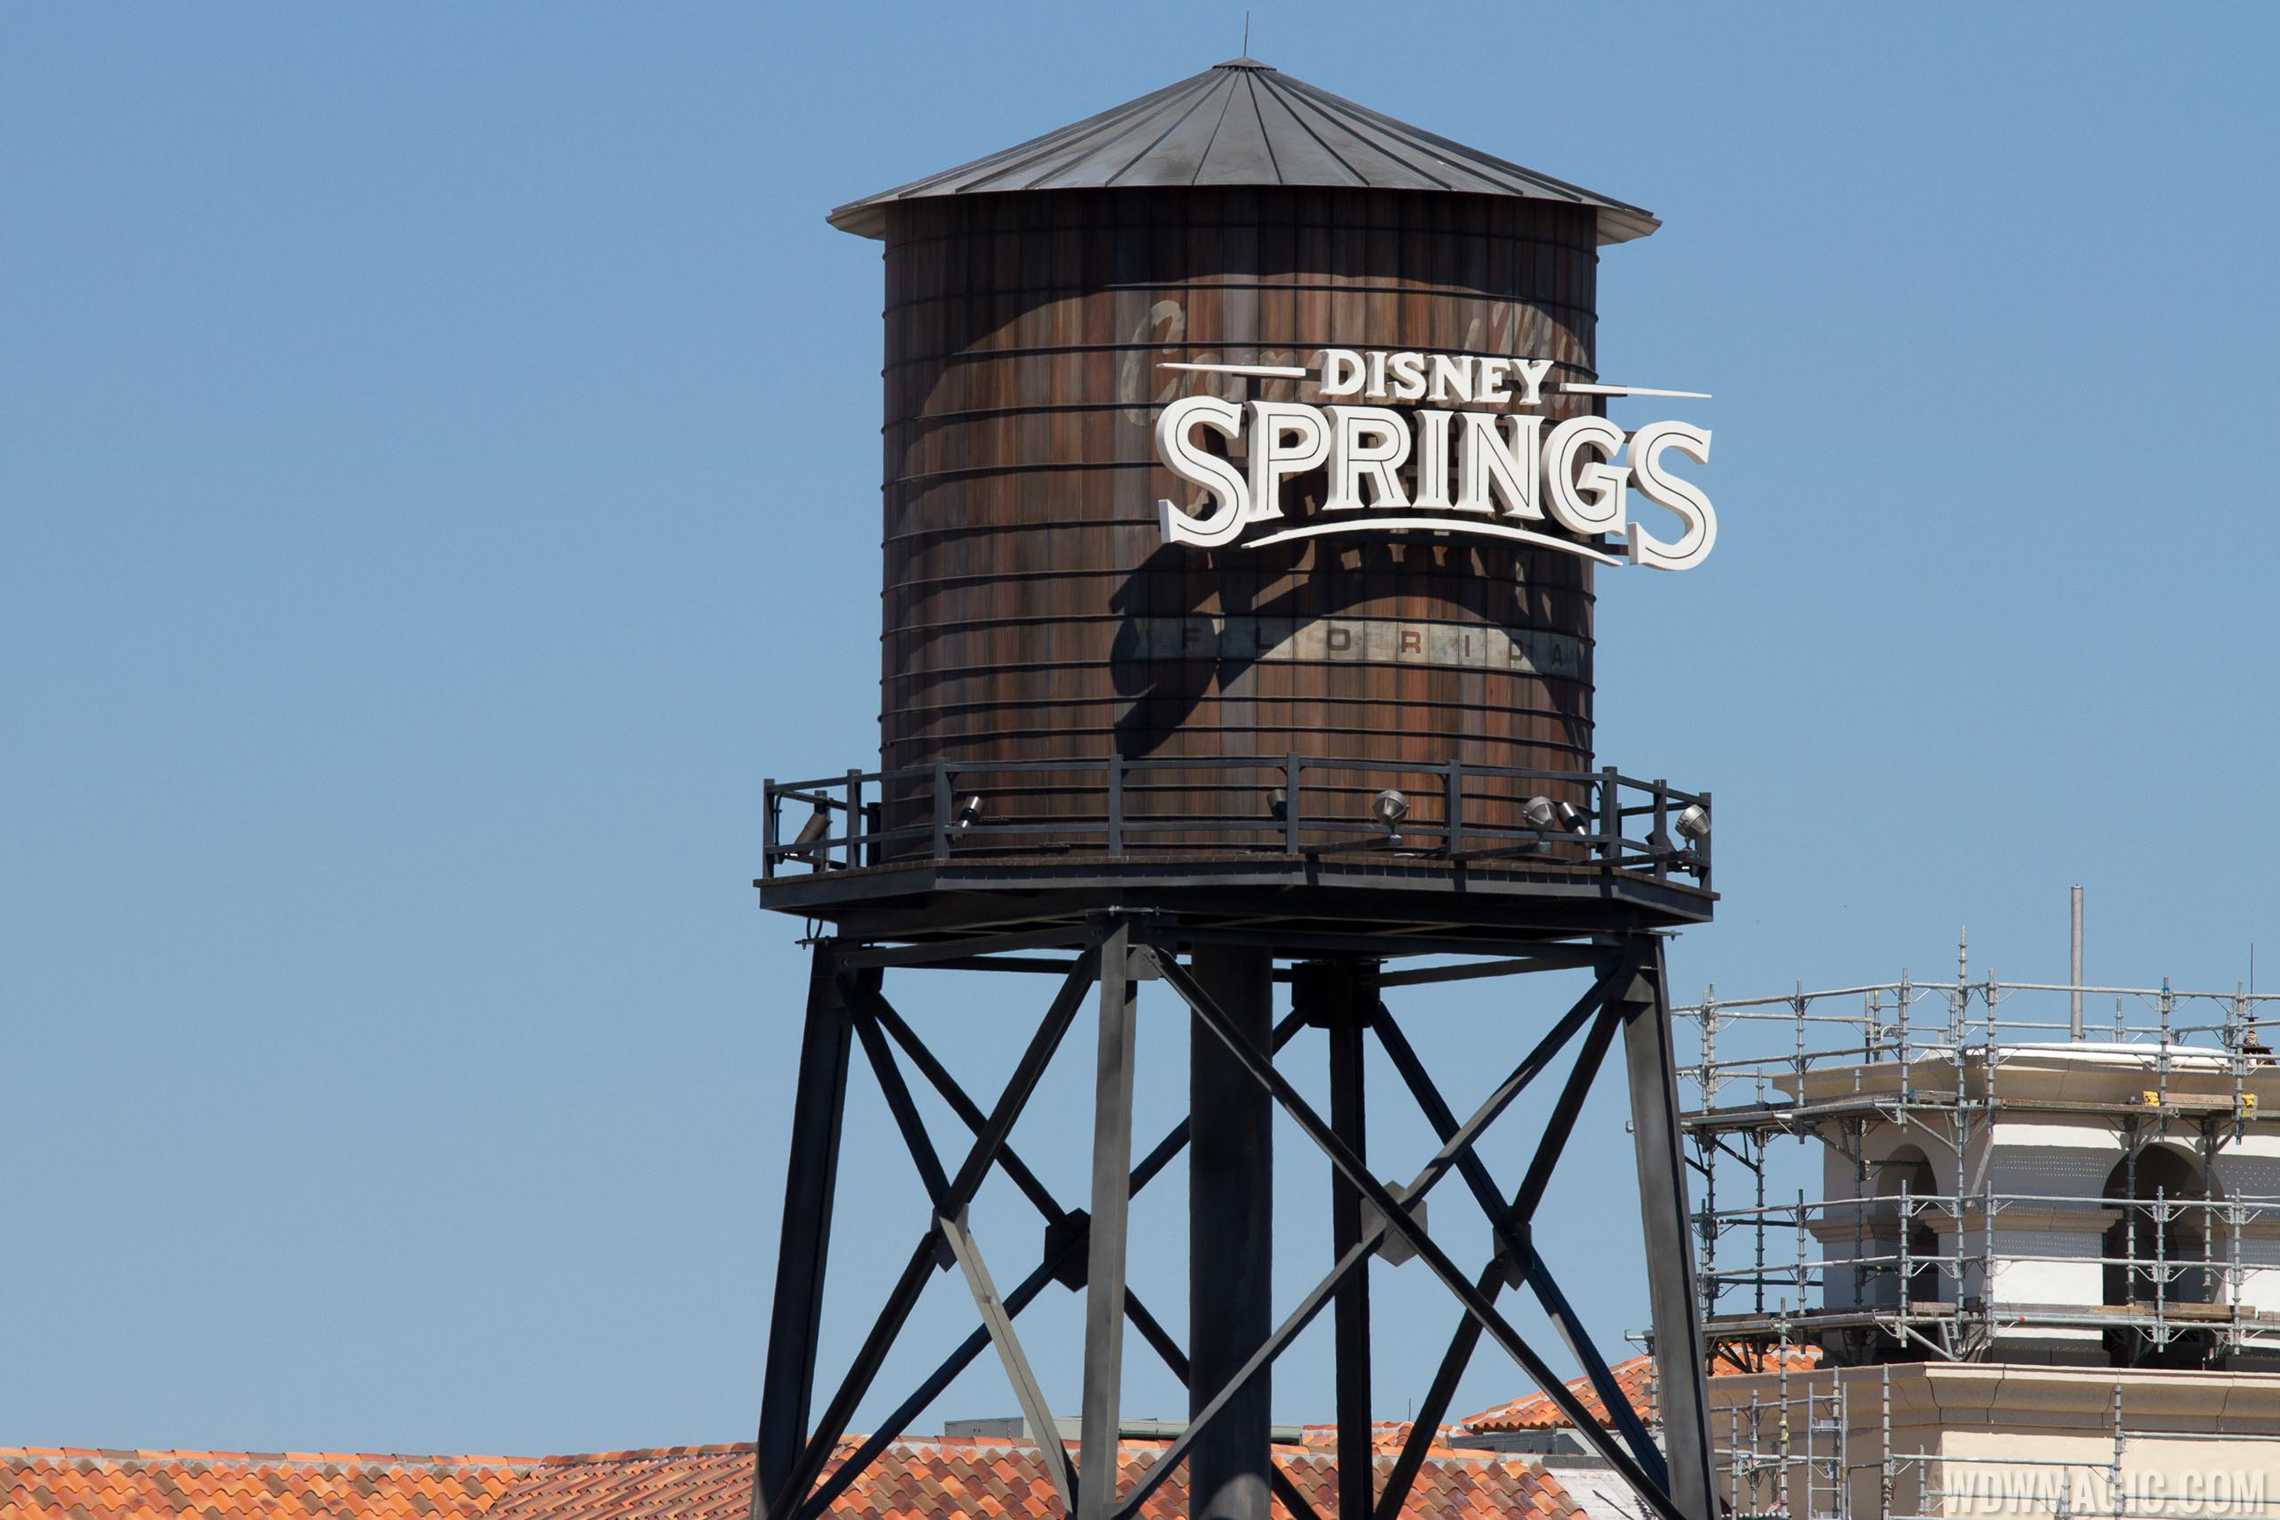 PHOTOS - Water tower arrives at Disney Springs